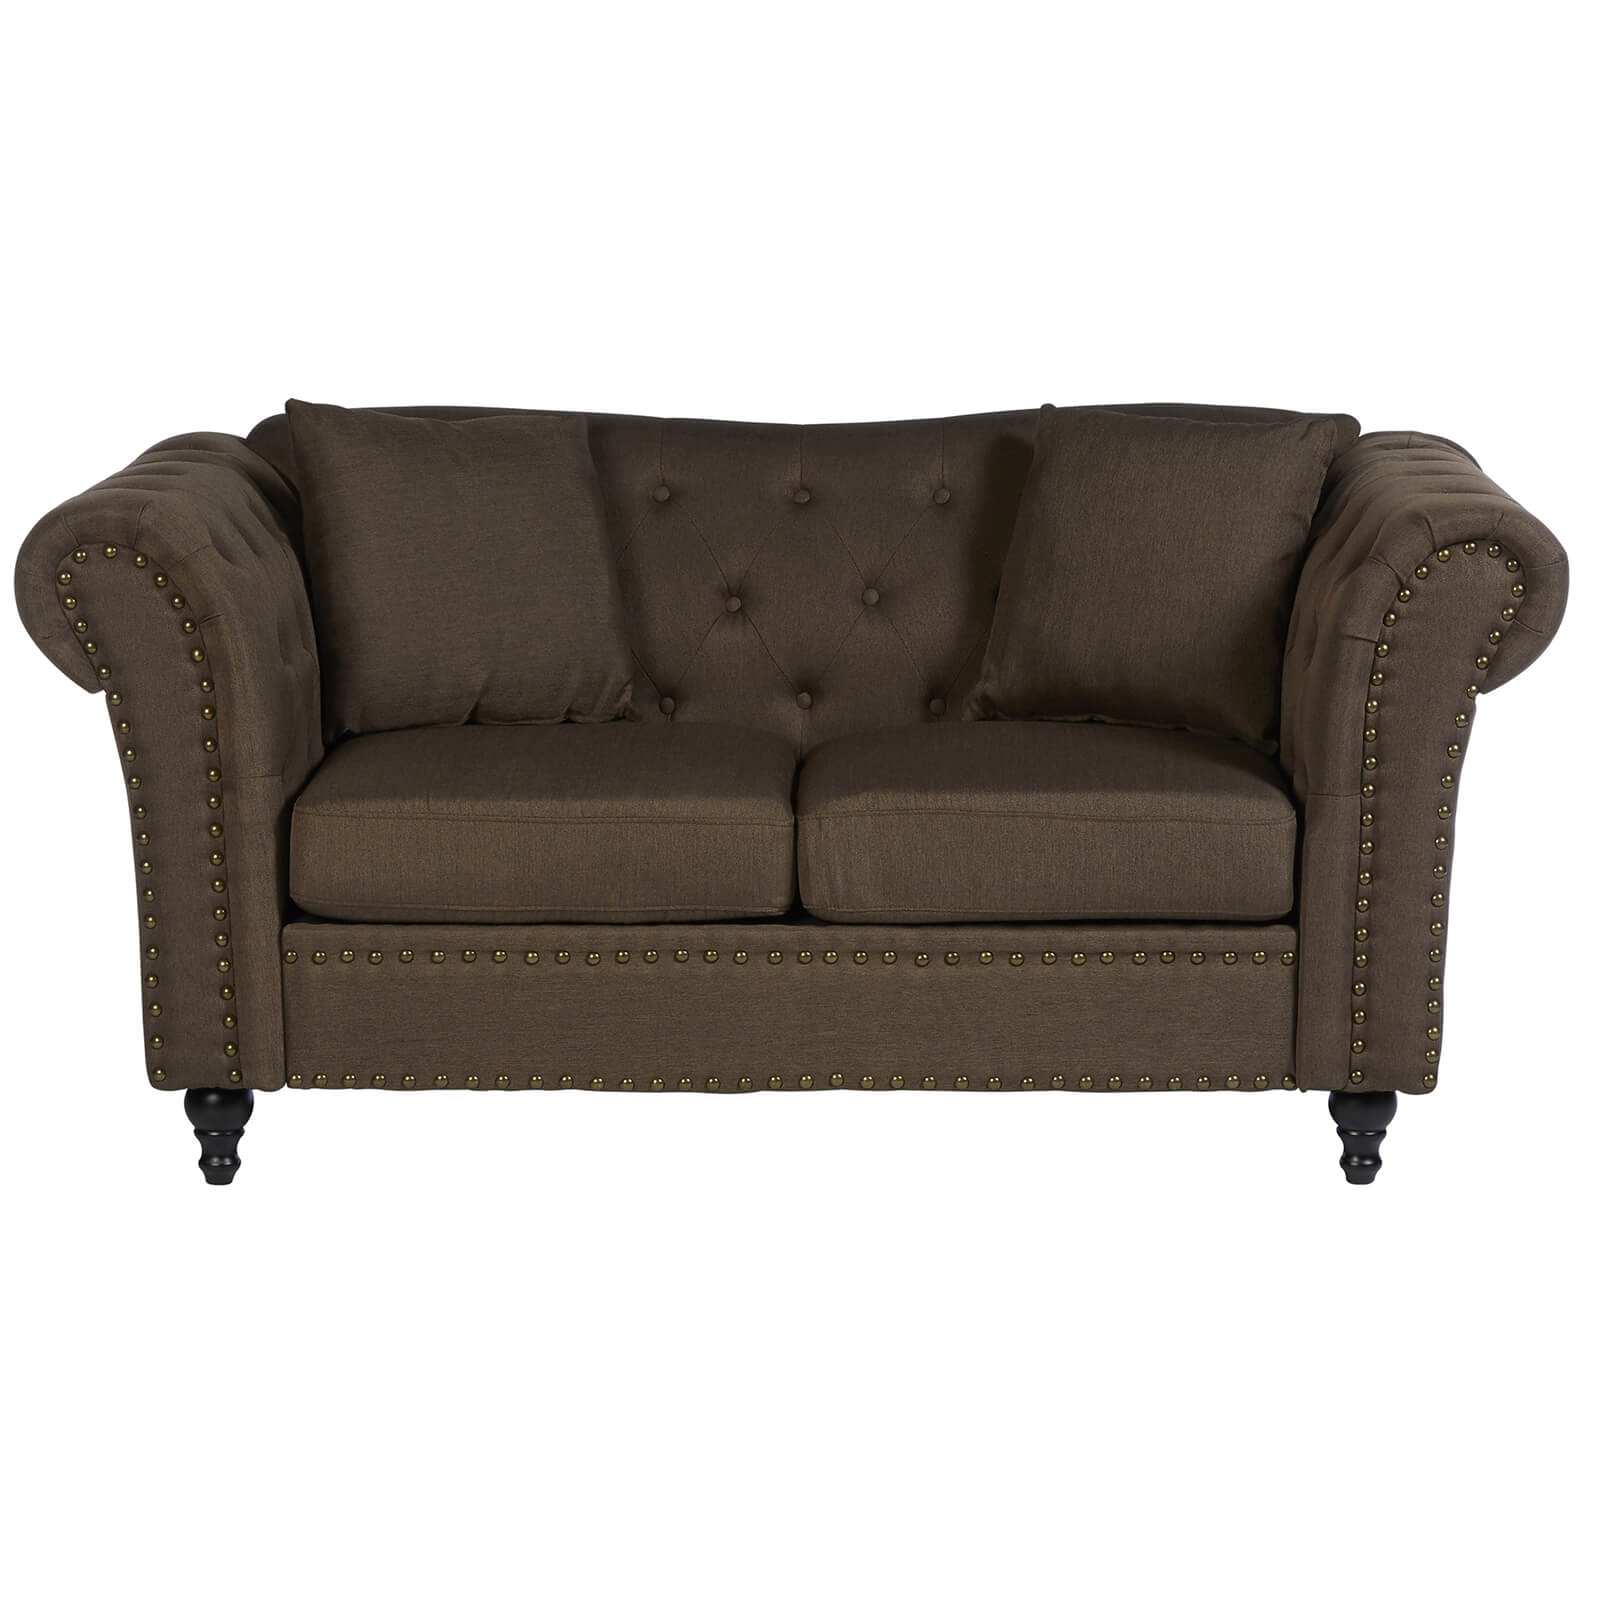 Fable 2 Seat Chesterfield Sofa - Natural